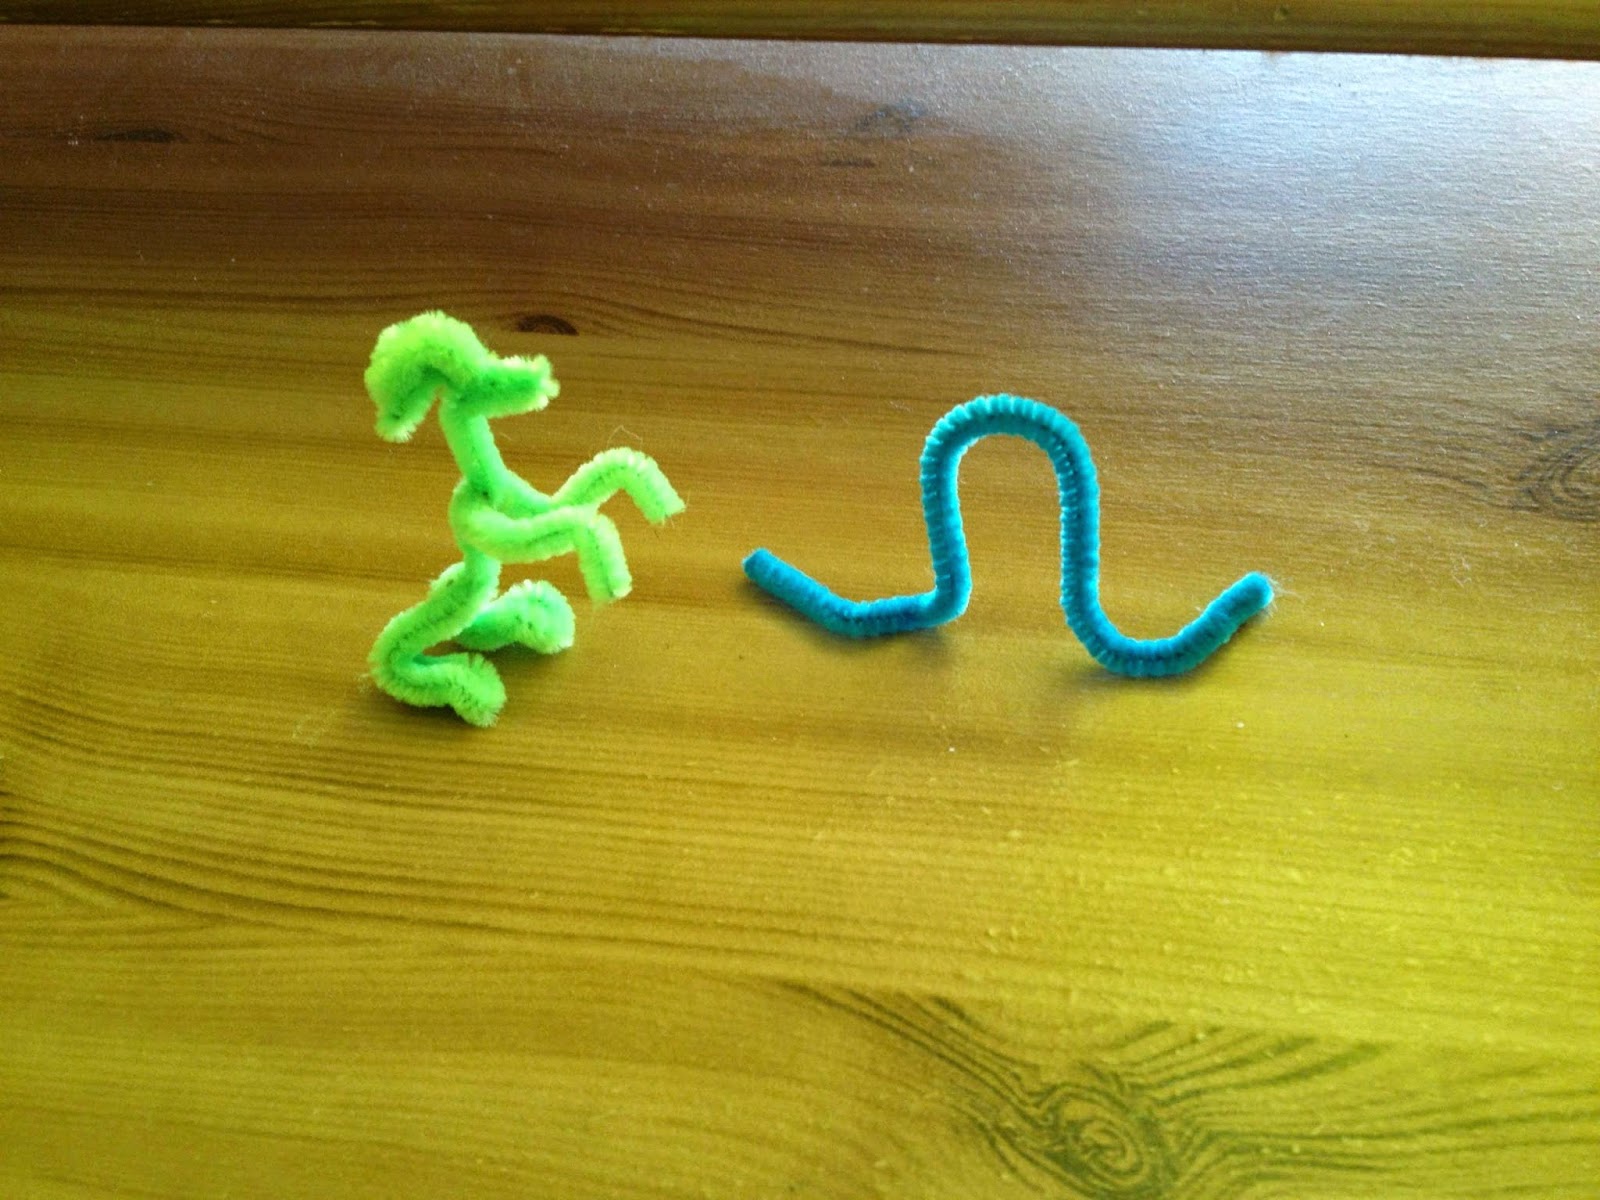 How can one make pipe cleaner people?